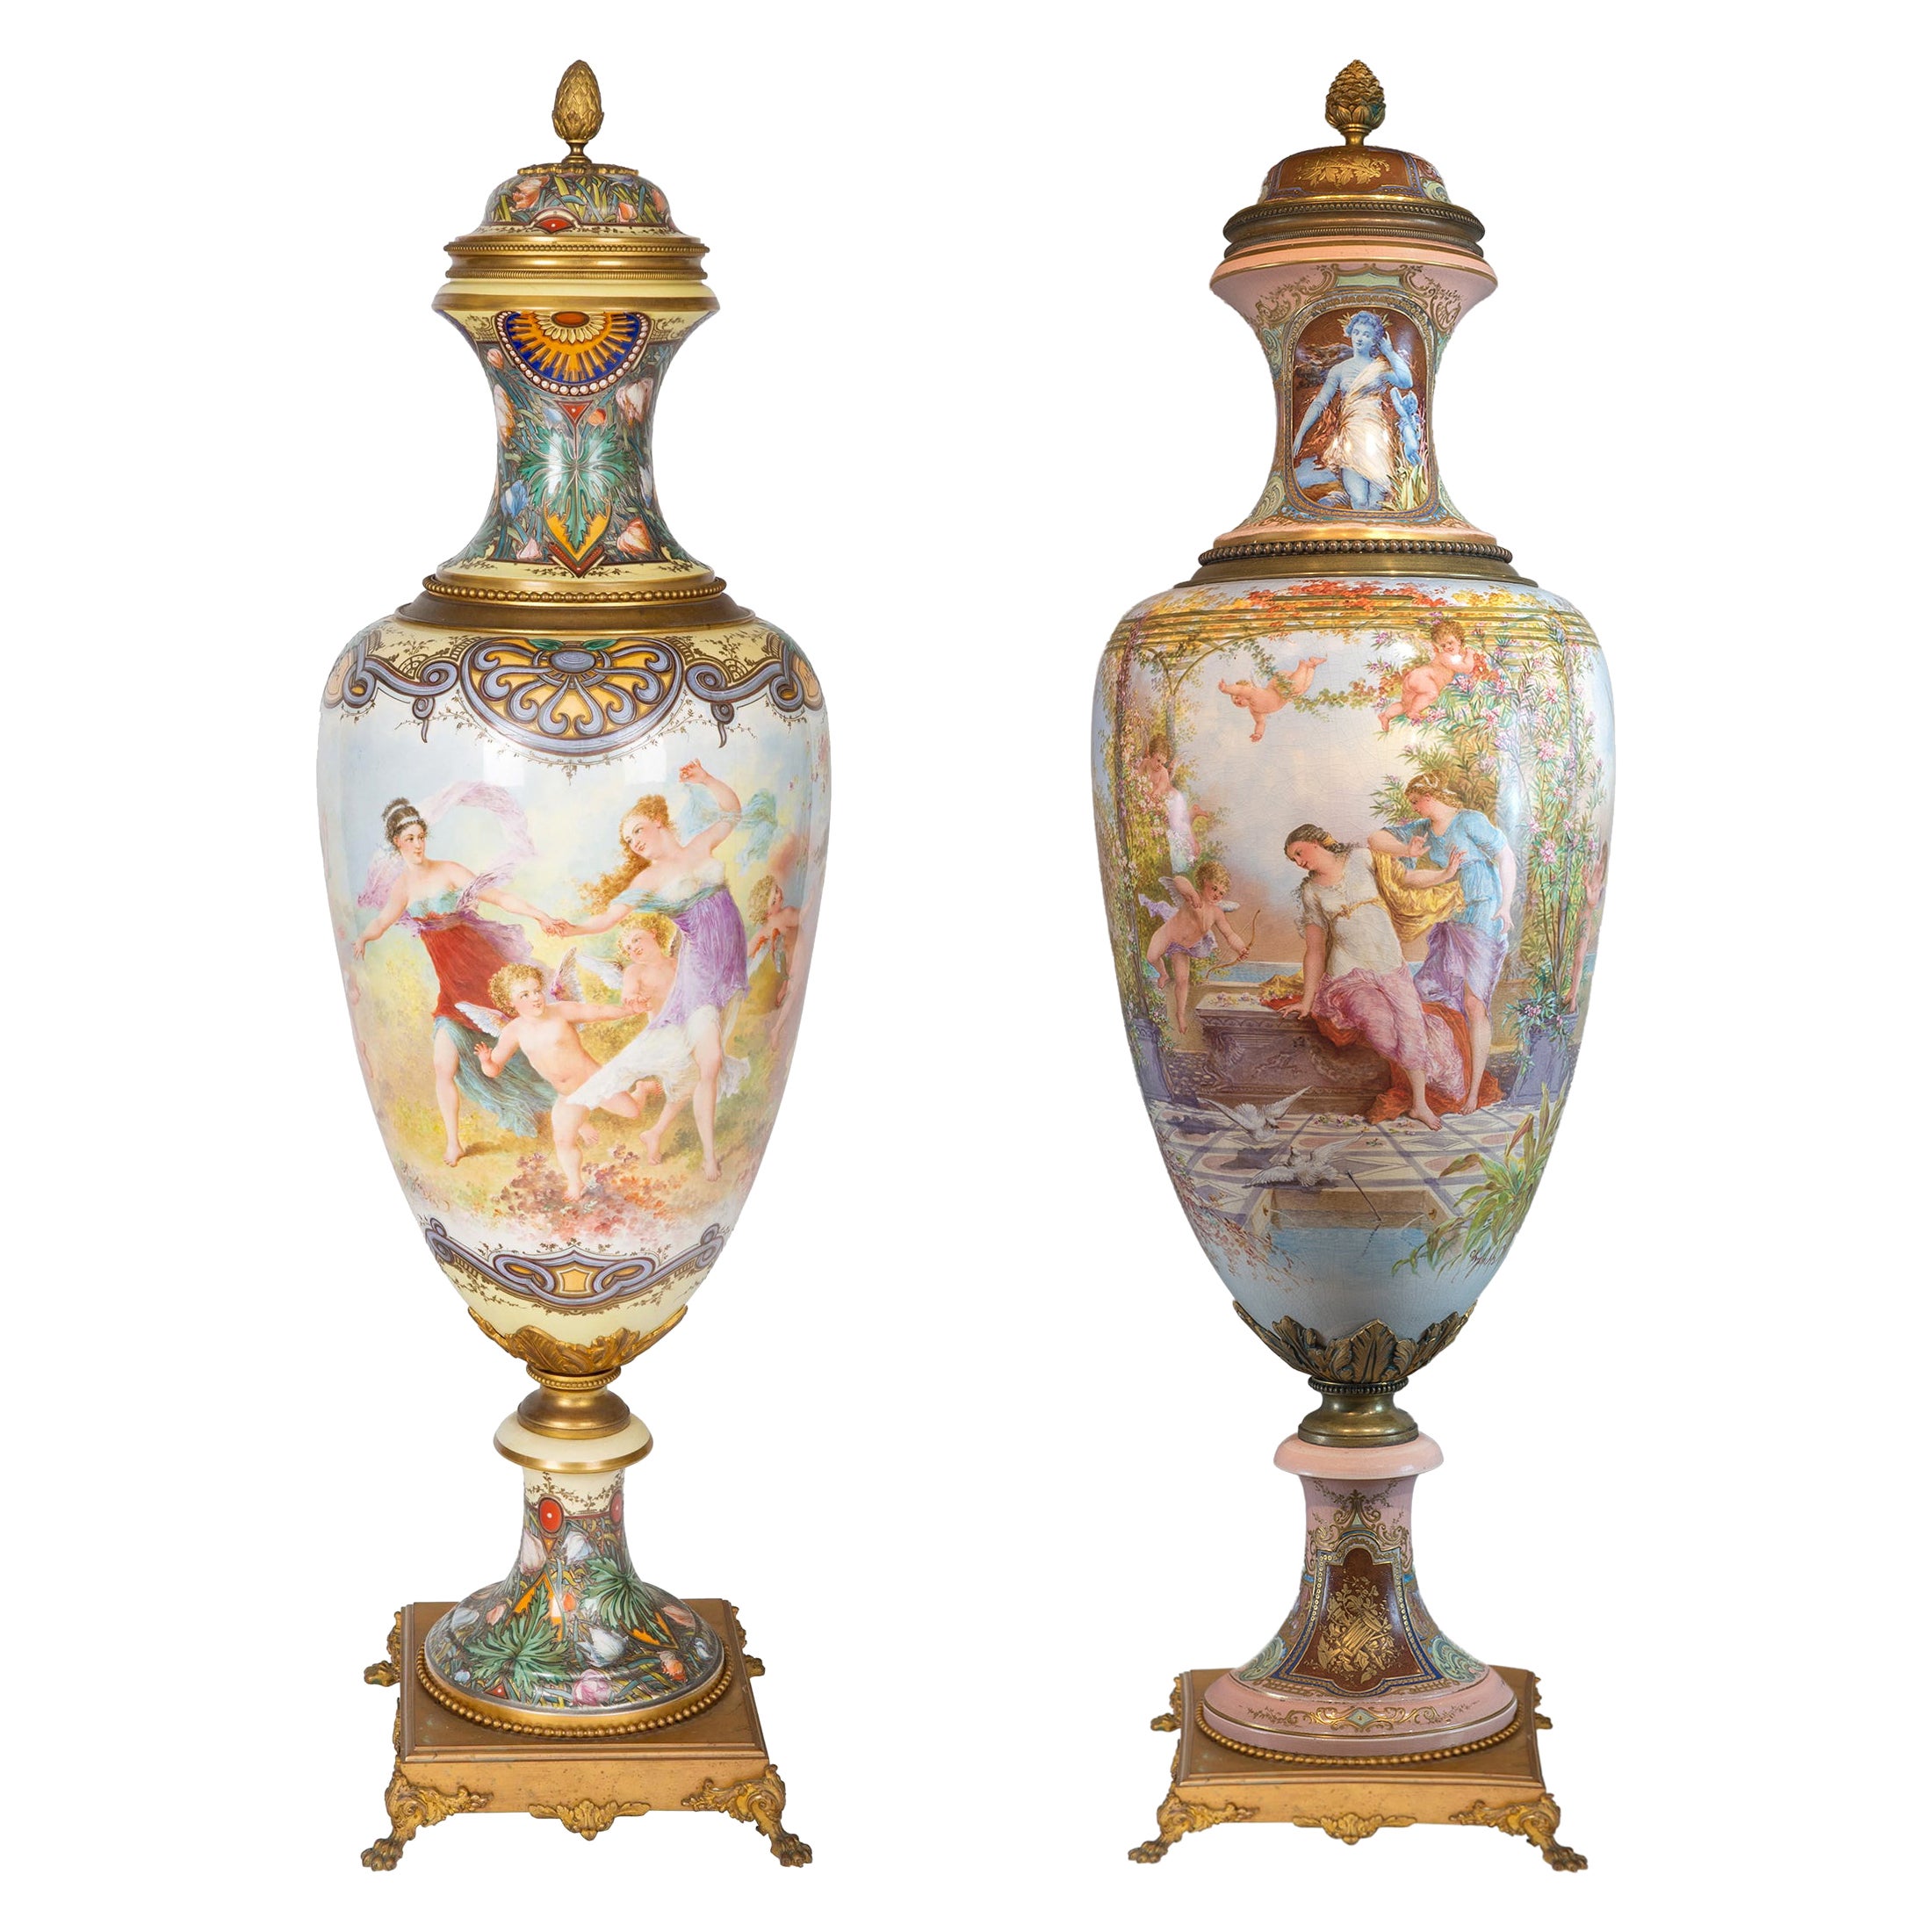  Pair of Monumental Sèvres and Gilt Bronze-Mounted Vase by Fuchs For Sale